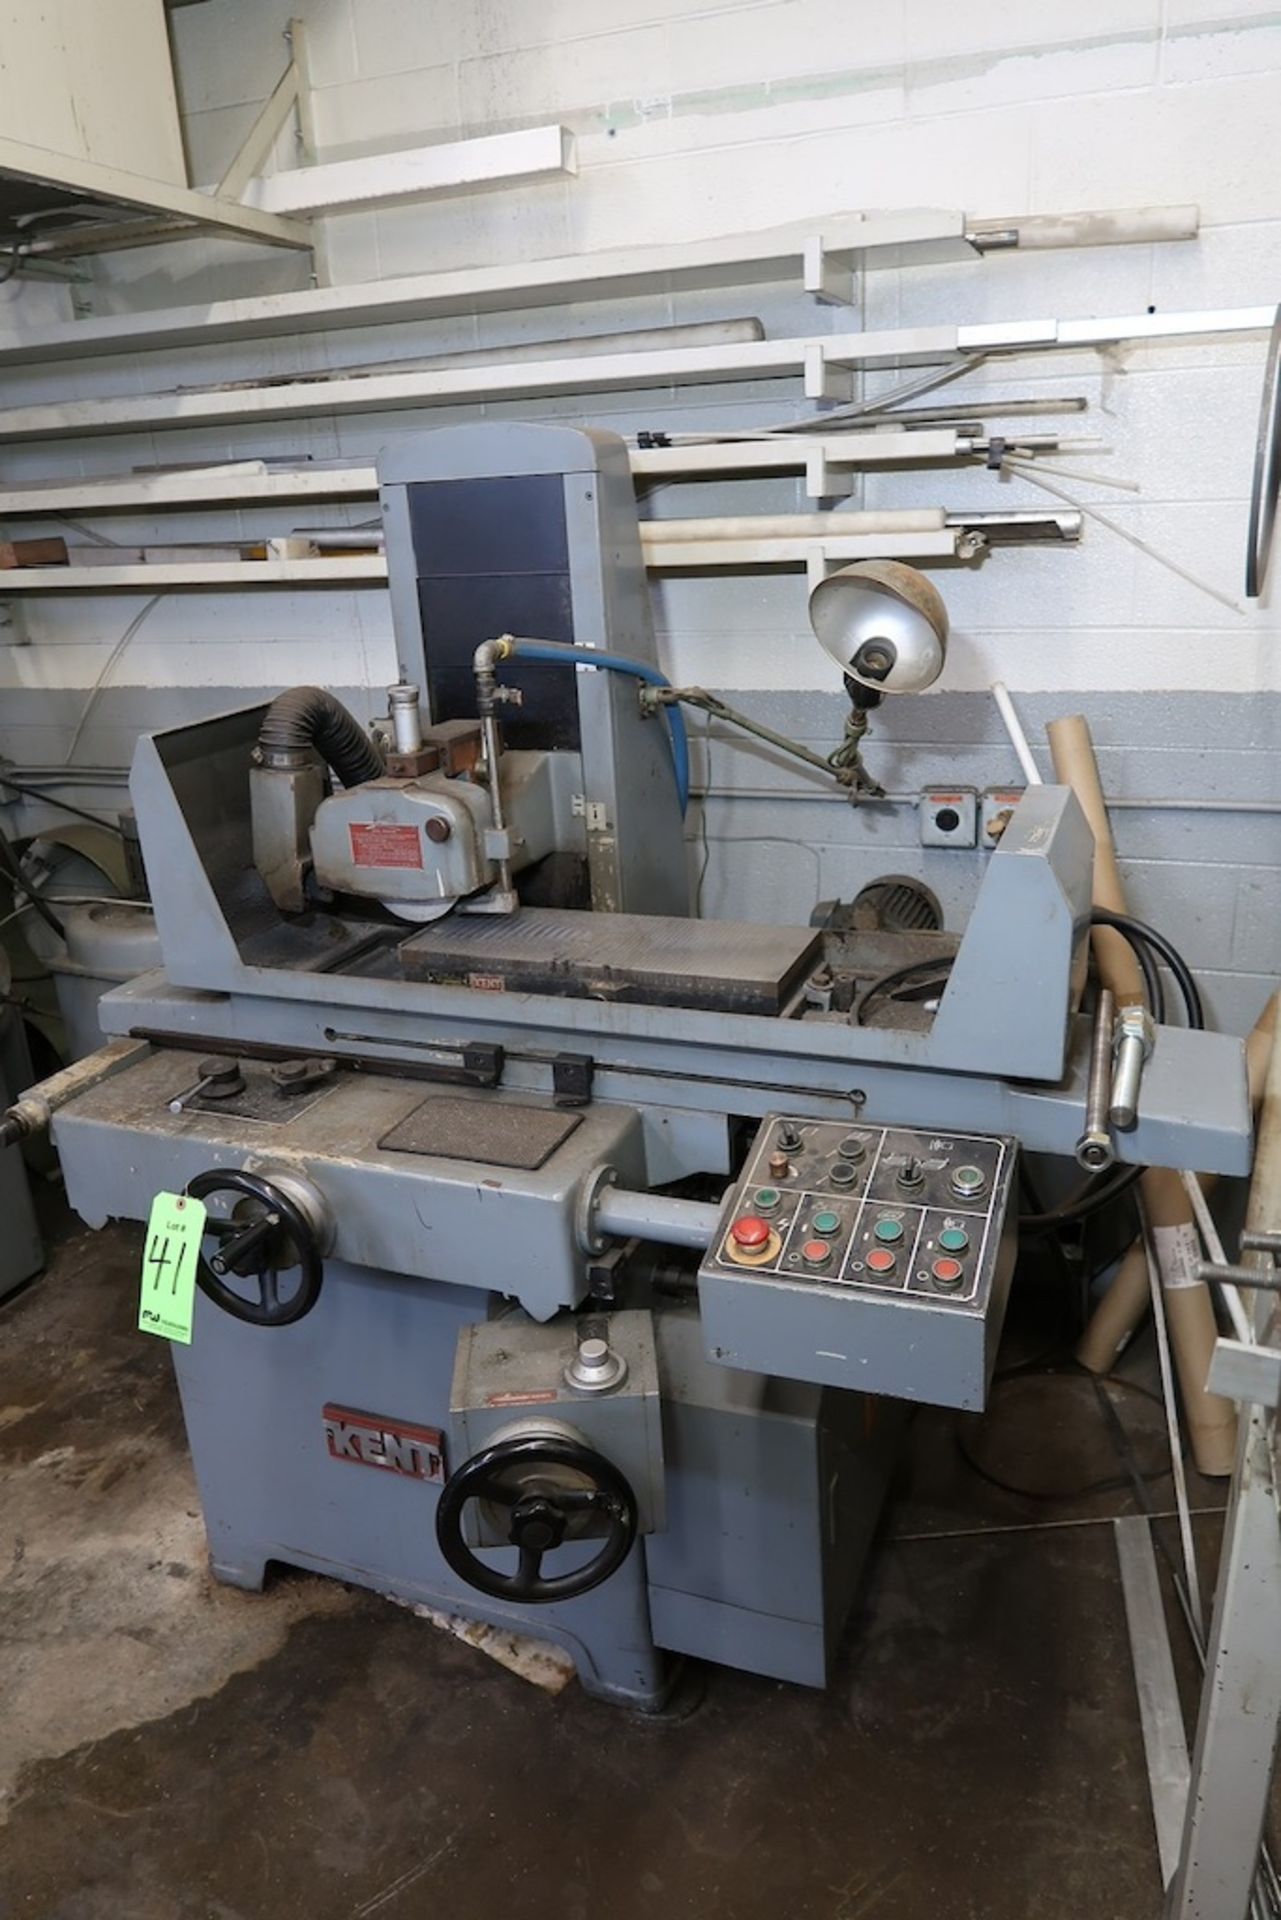 Kent KGS-250AHD 20" x 8" Surface Grinder - Image 2 of 4